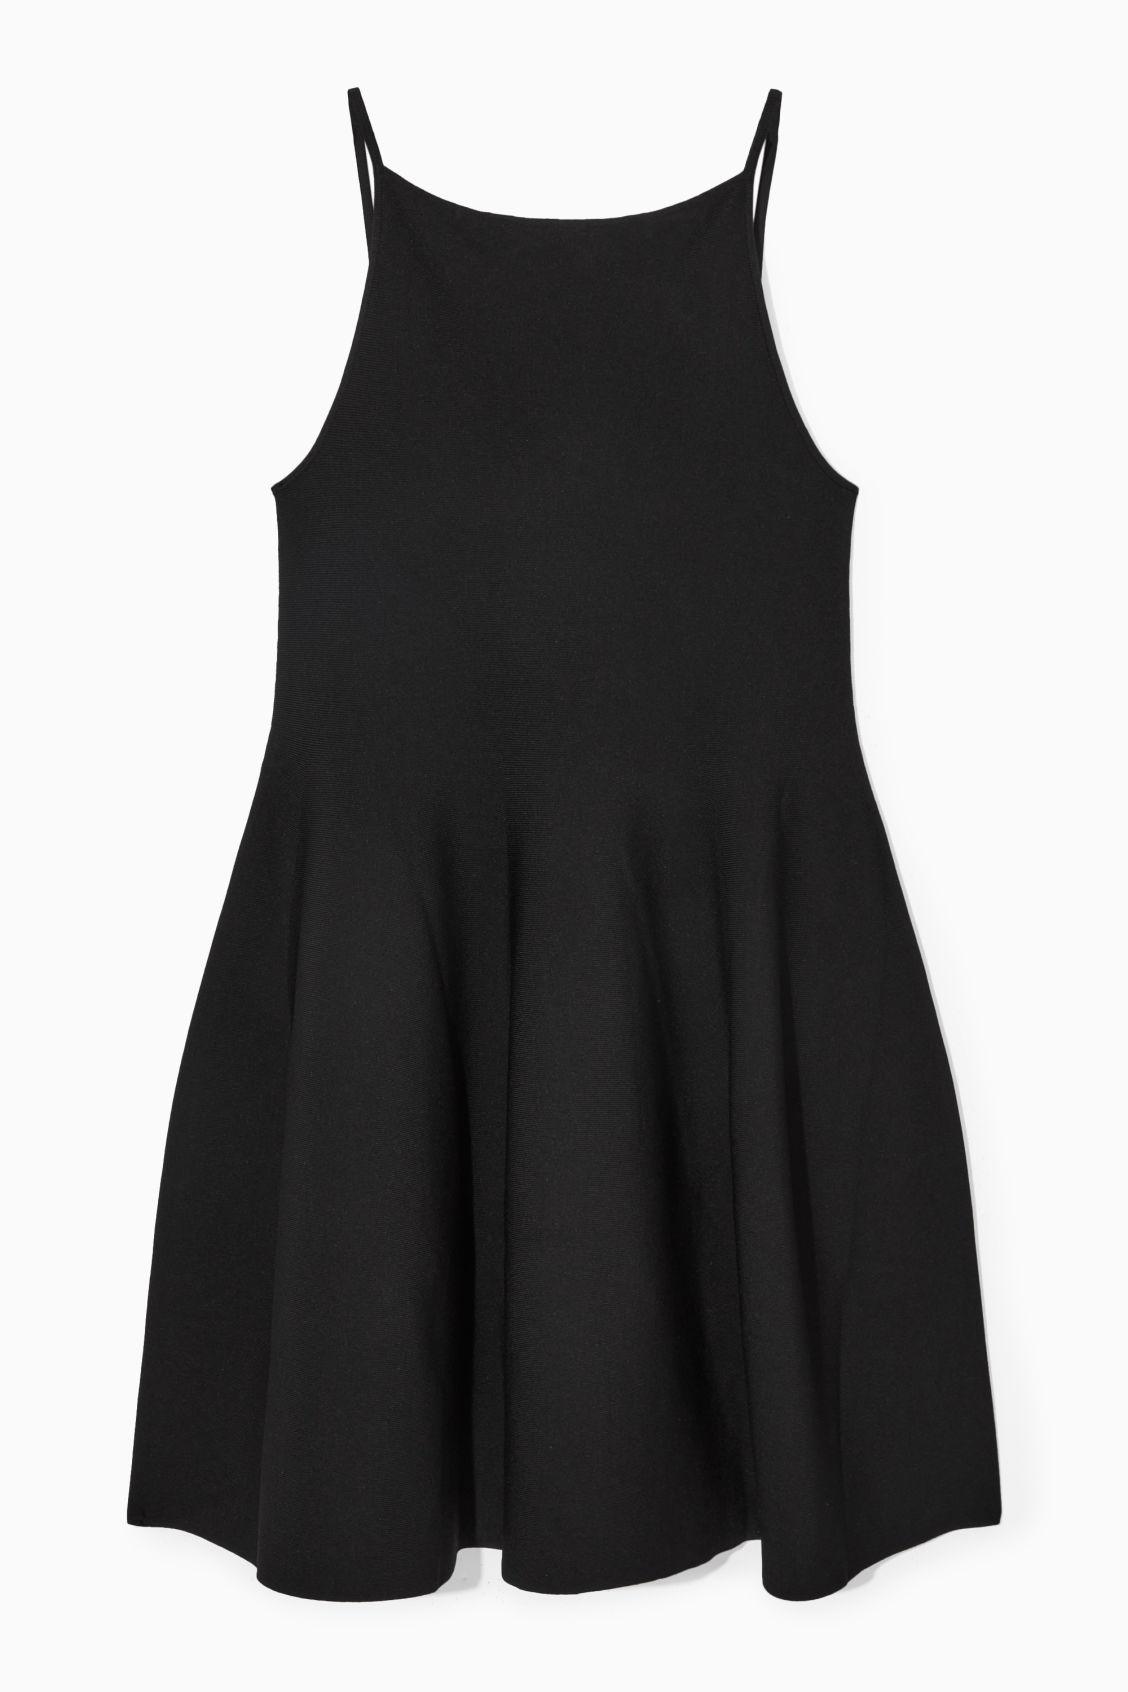 COS Square-neck Knitted Mini Dress in Black | Lyst